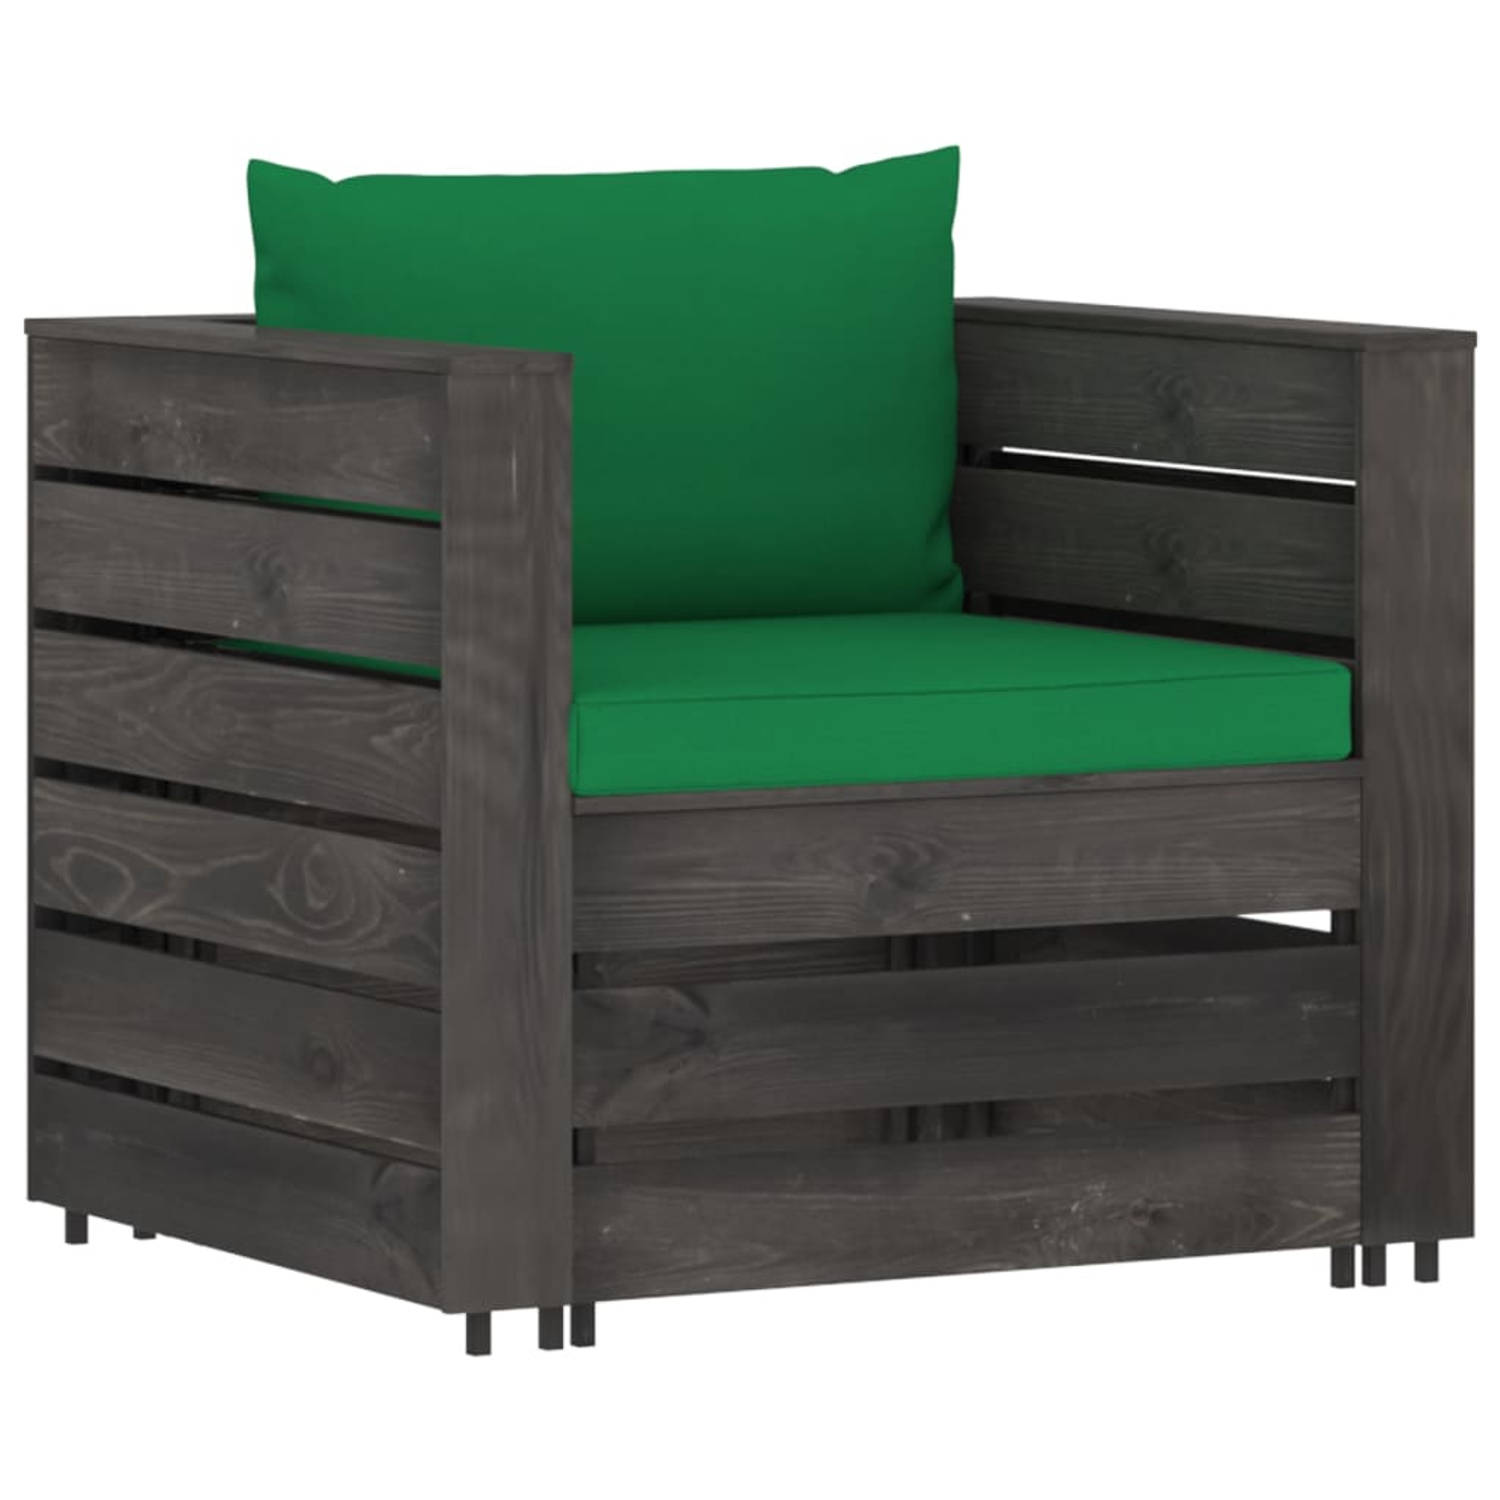 The Living Store Pallet Loungeset - Tuinset - 77x70x66 cm - Grenenhout